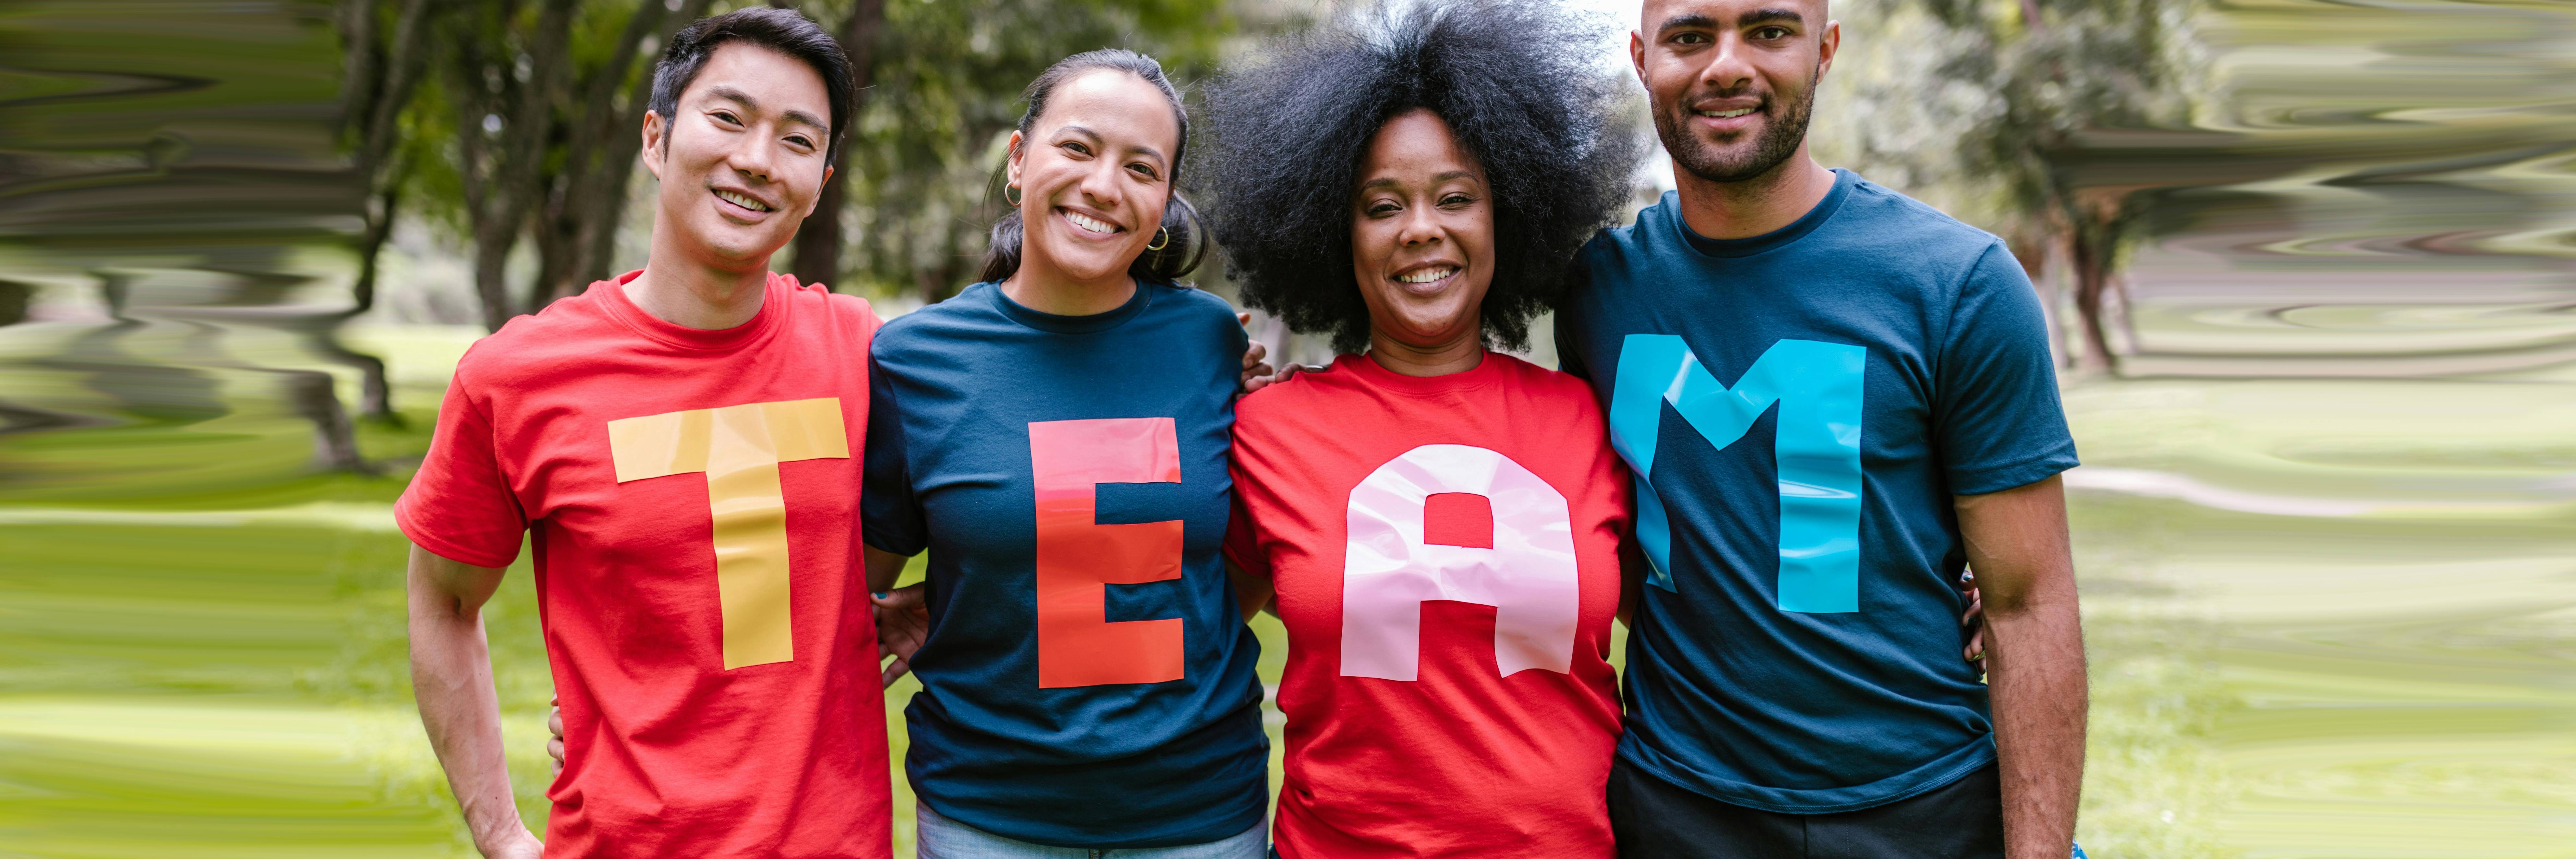 group of diverse adults wearing bright shirts that spell out TEAM